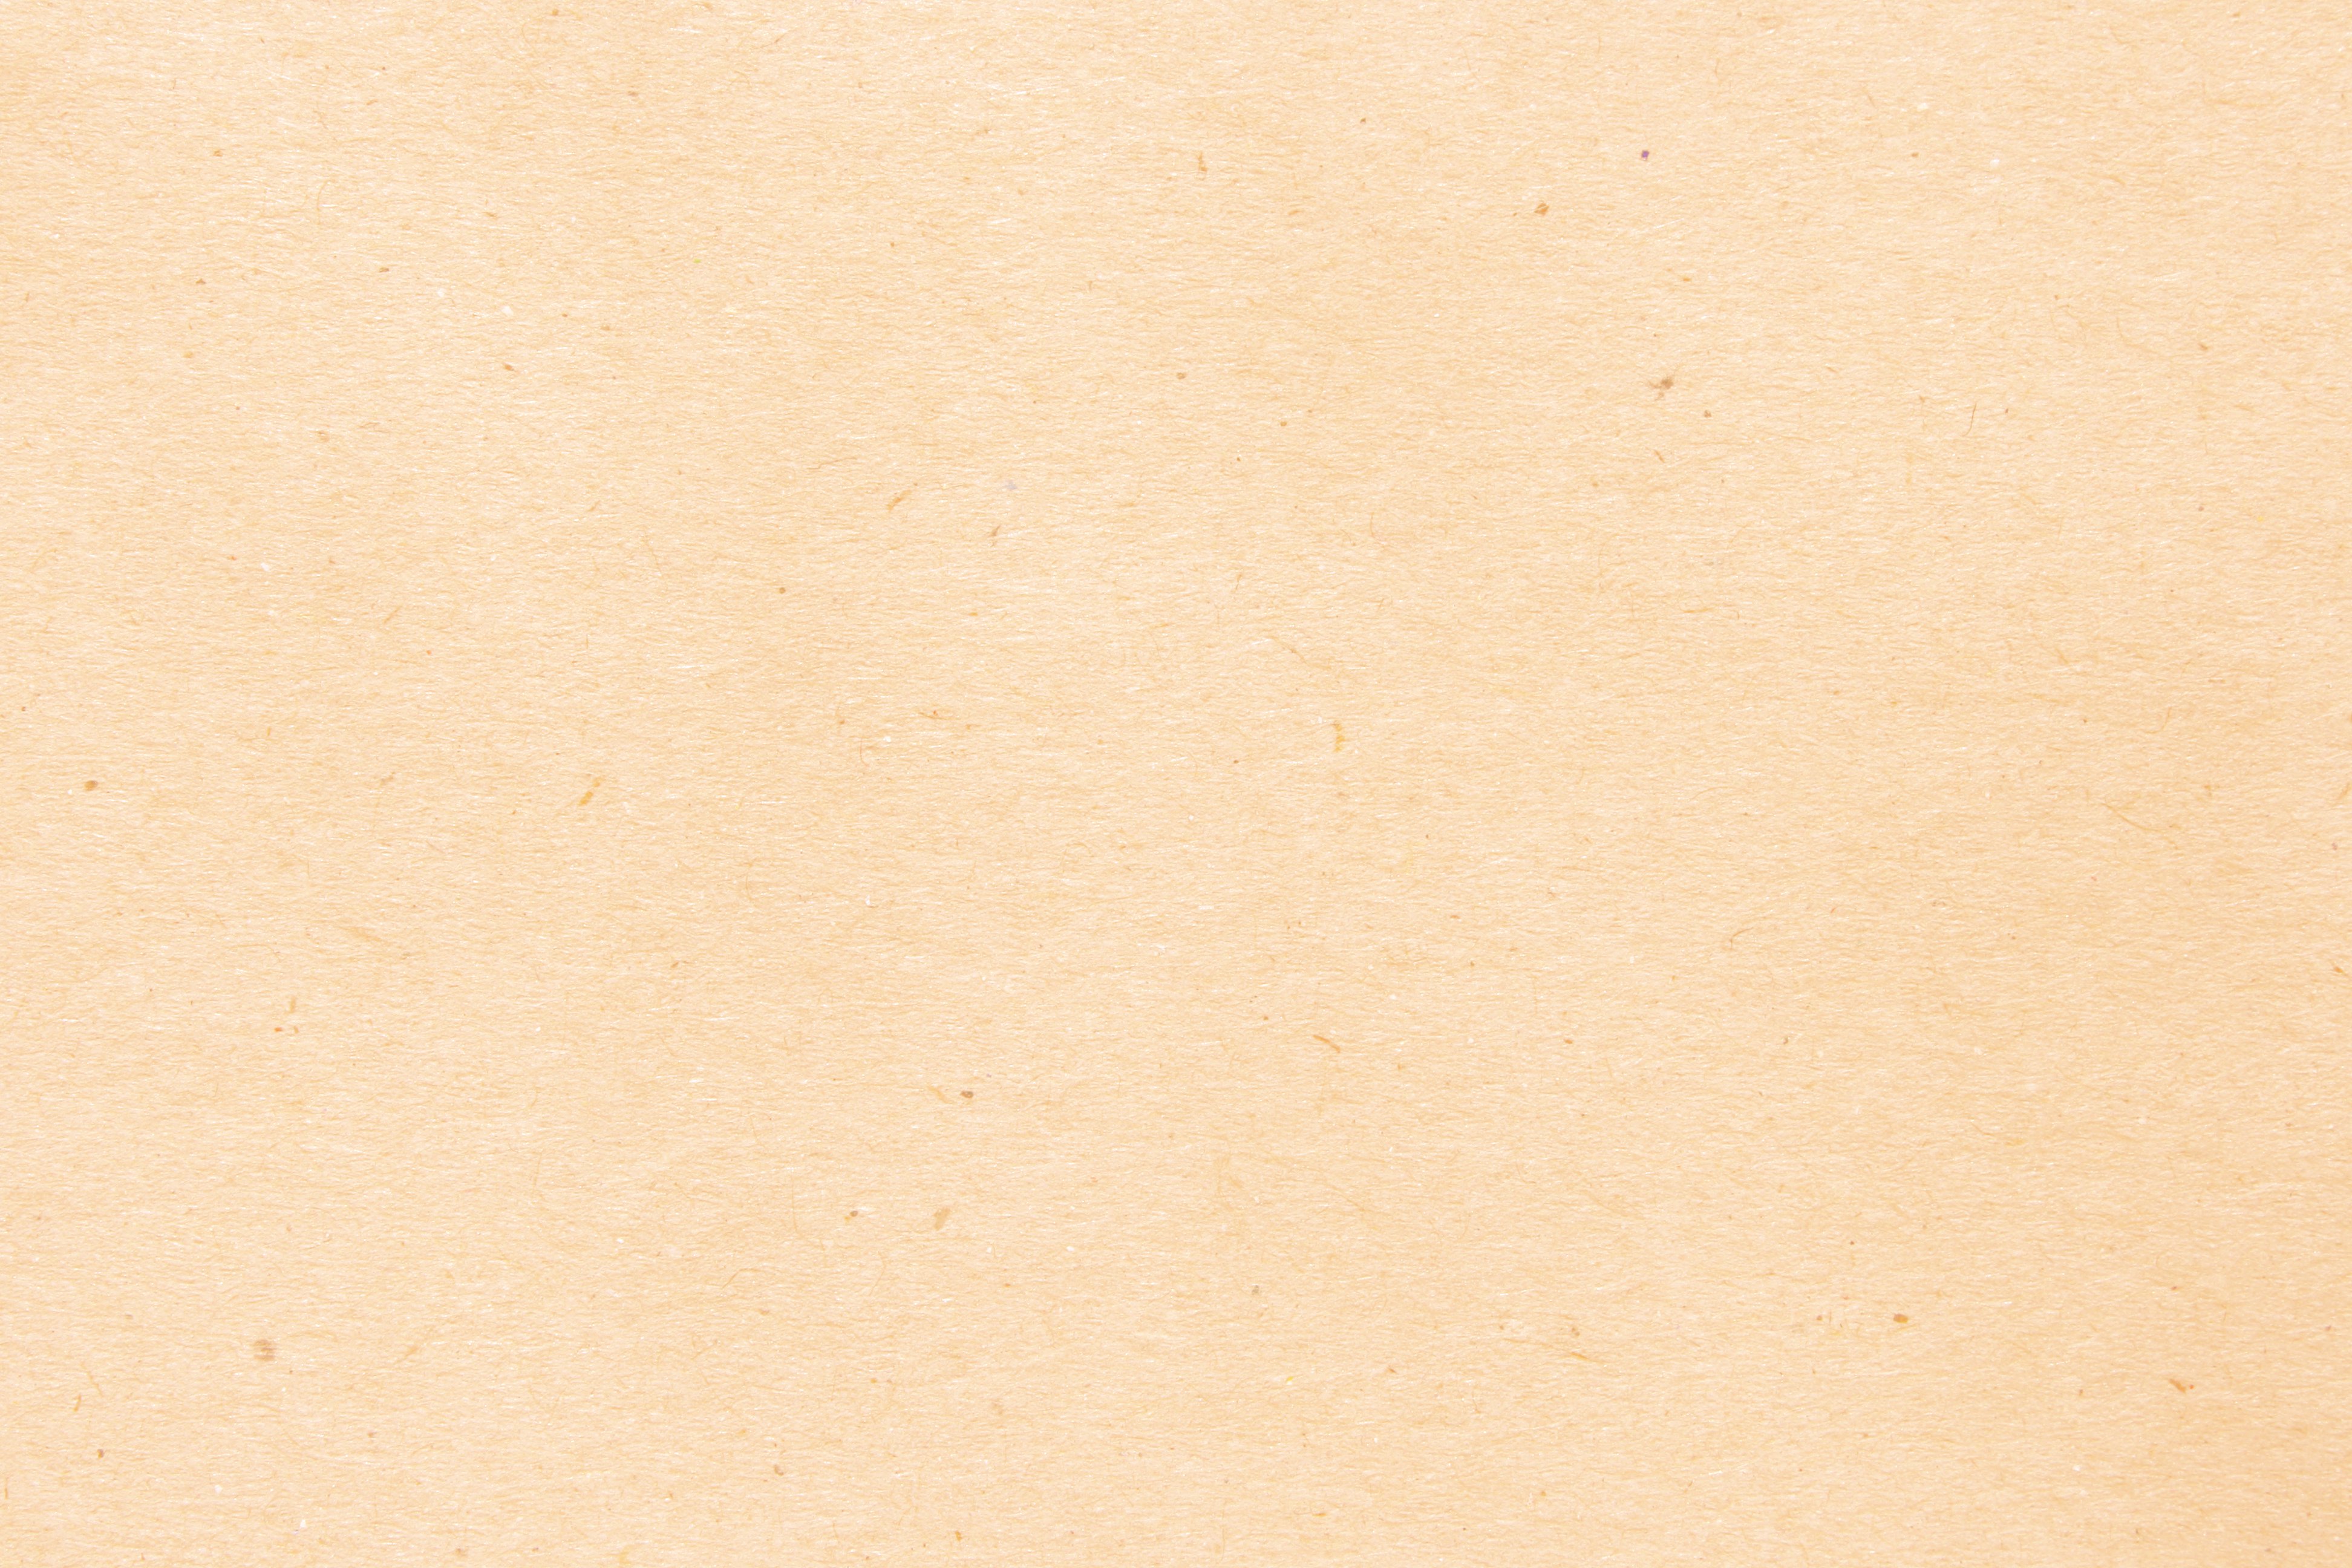 Peach Colored Paper Texture with Flecks Free High Resolution Photo